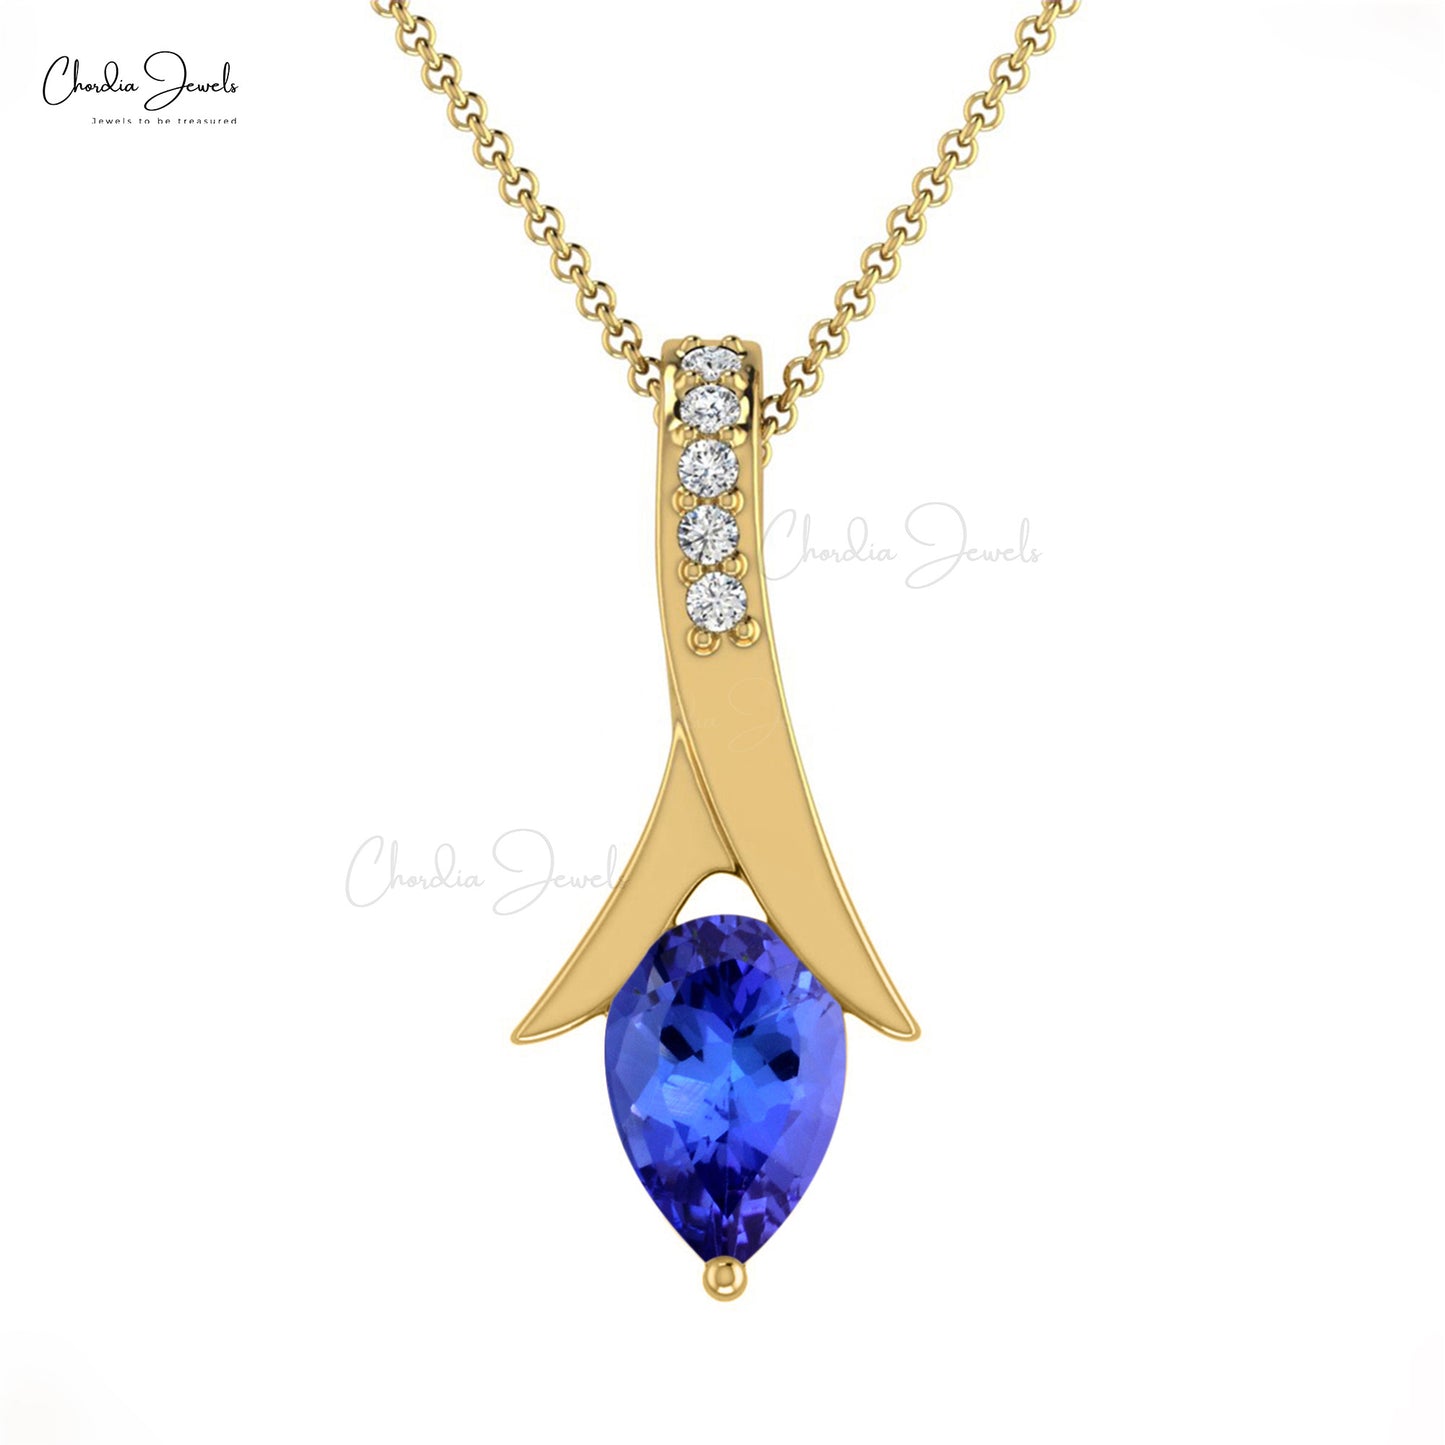 Natural Tanzanite and White Diamond Teardrop Pendant Necklace 14k Solid Gold Pendant Hallmarked Jewelry For Wedding Gift